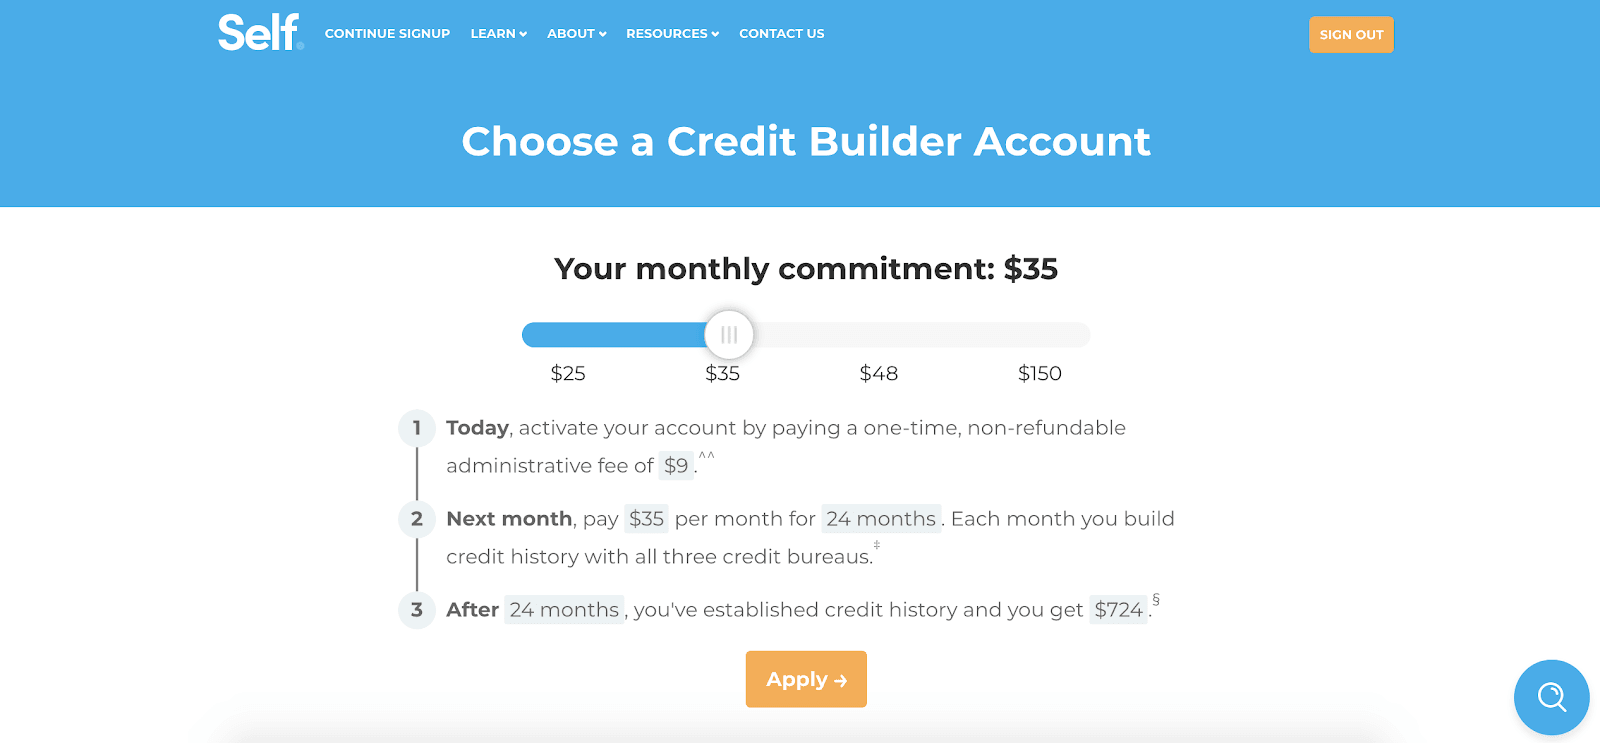 Self Review: Building Credit While Saving Money - Choose a credit builder account